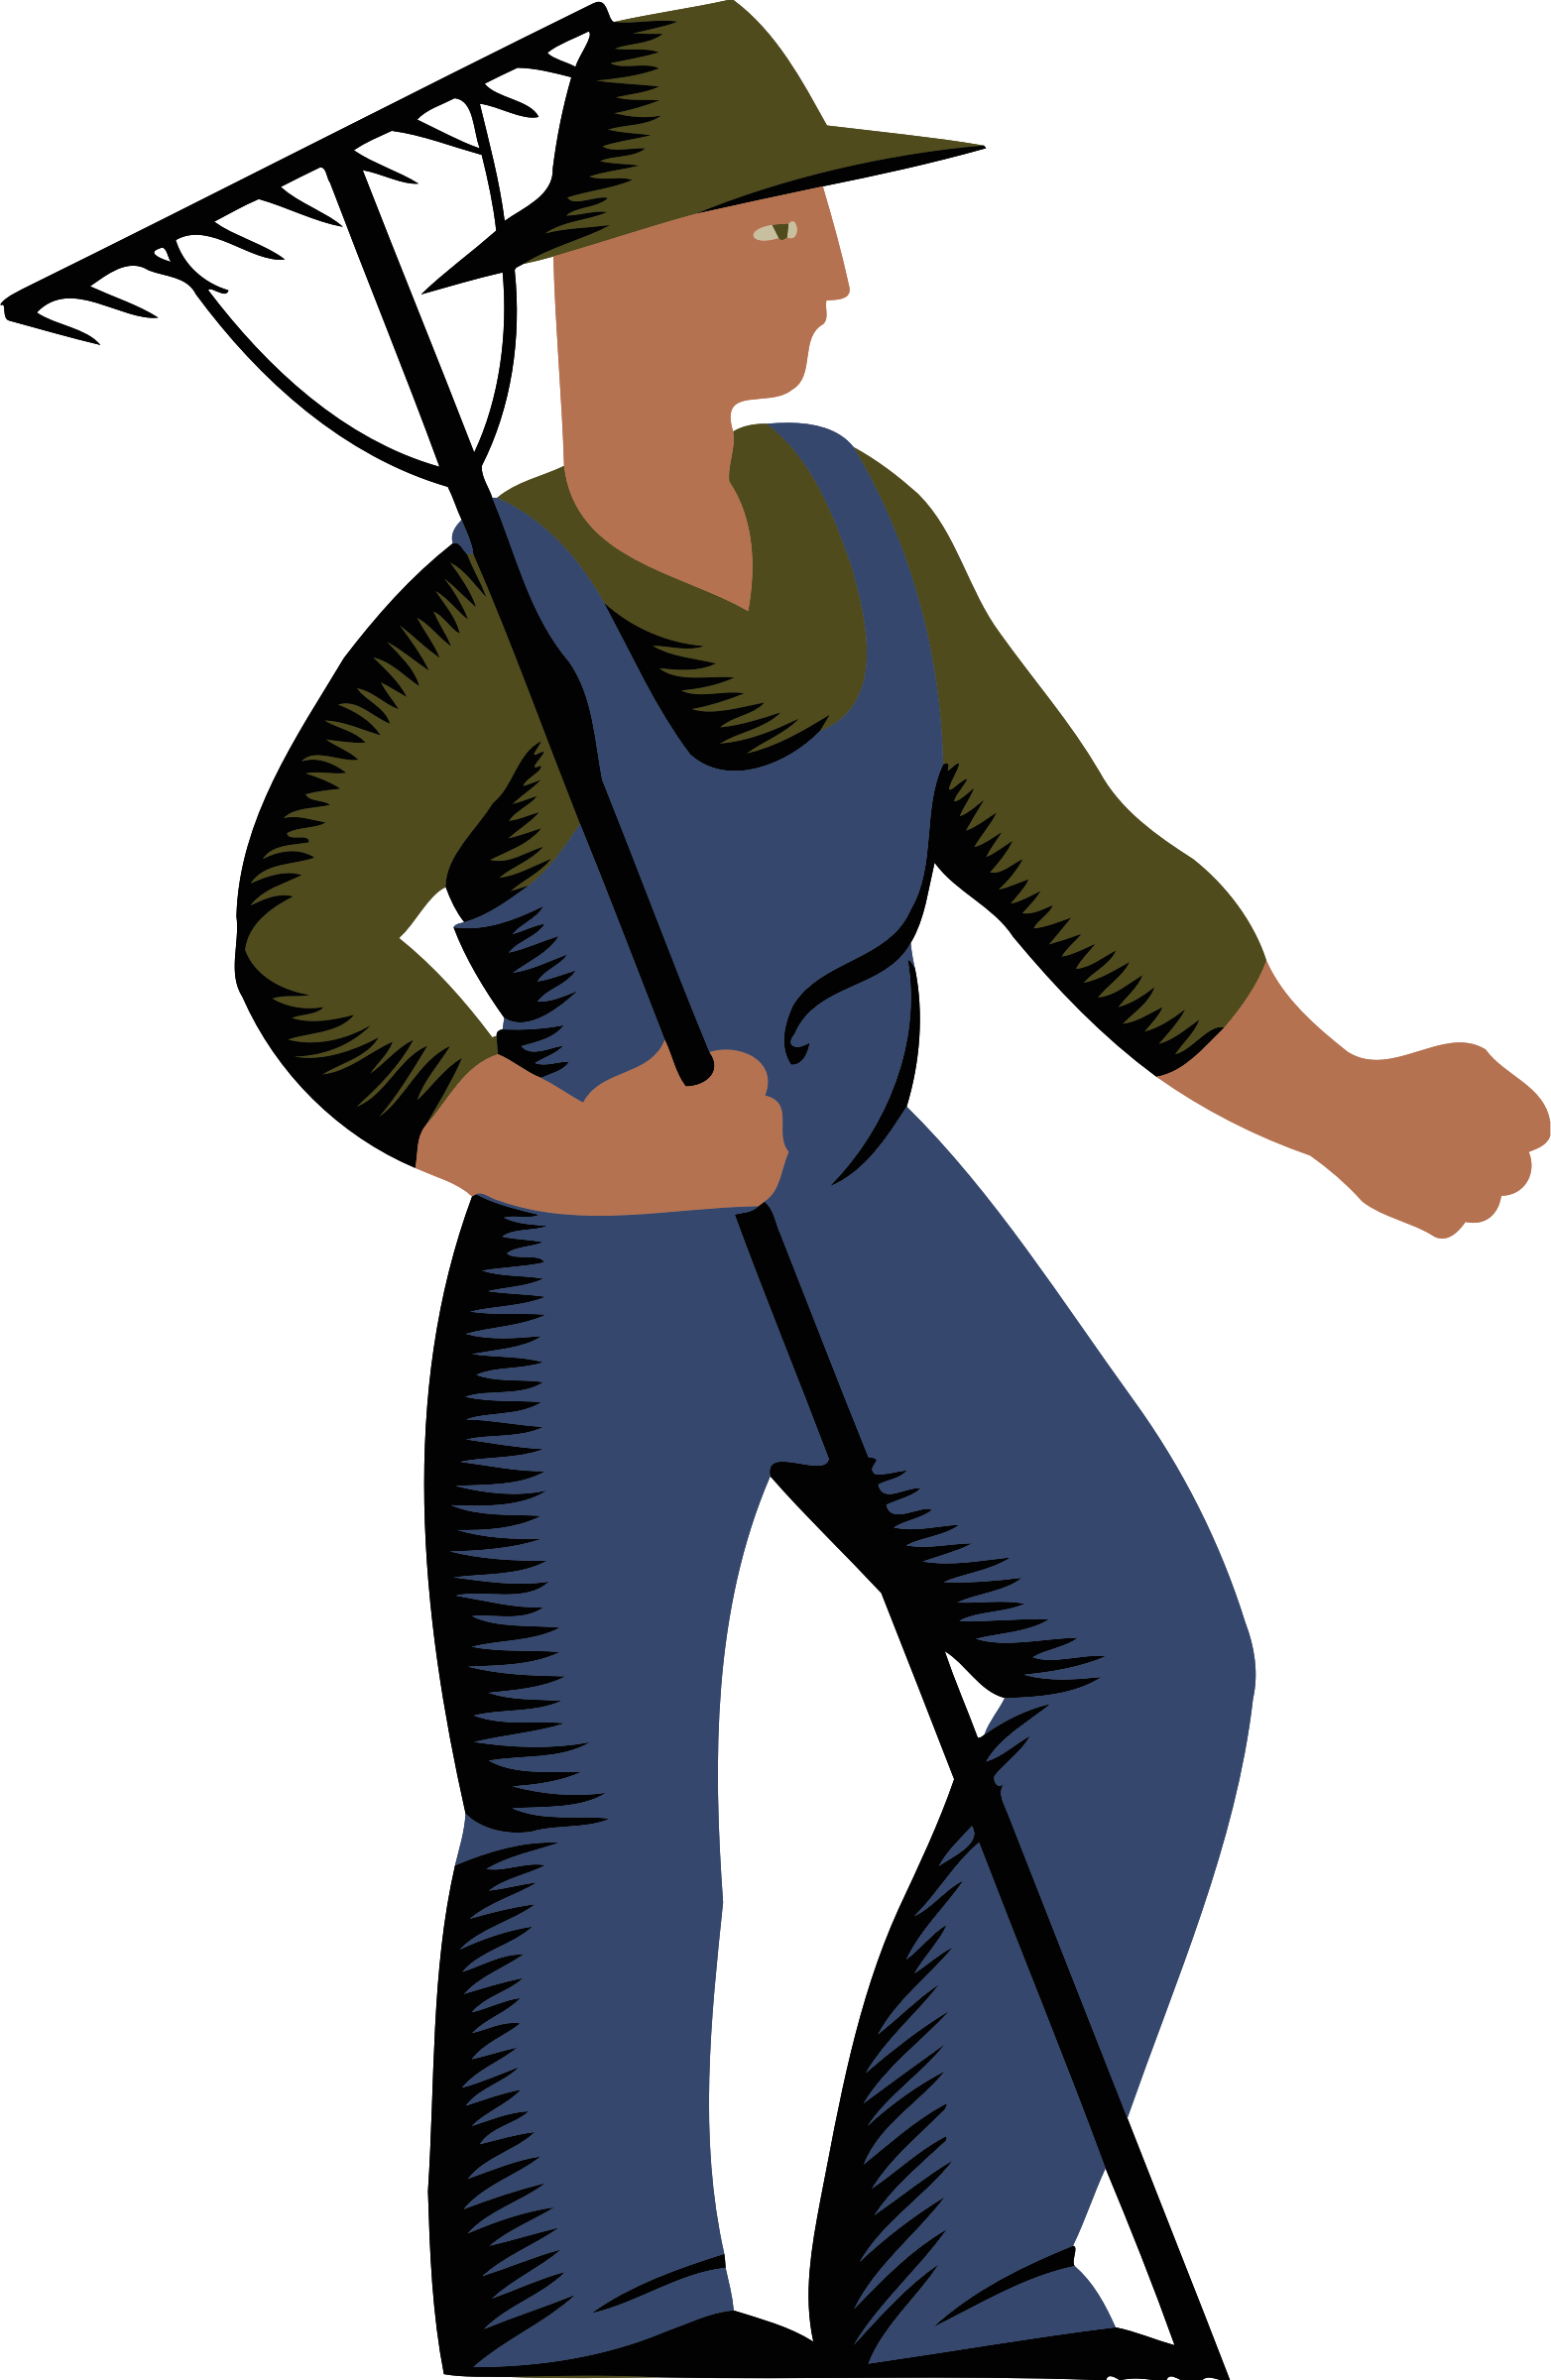 Worker big image png. Working clipart farm labour